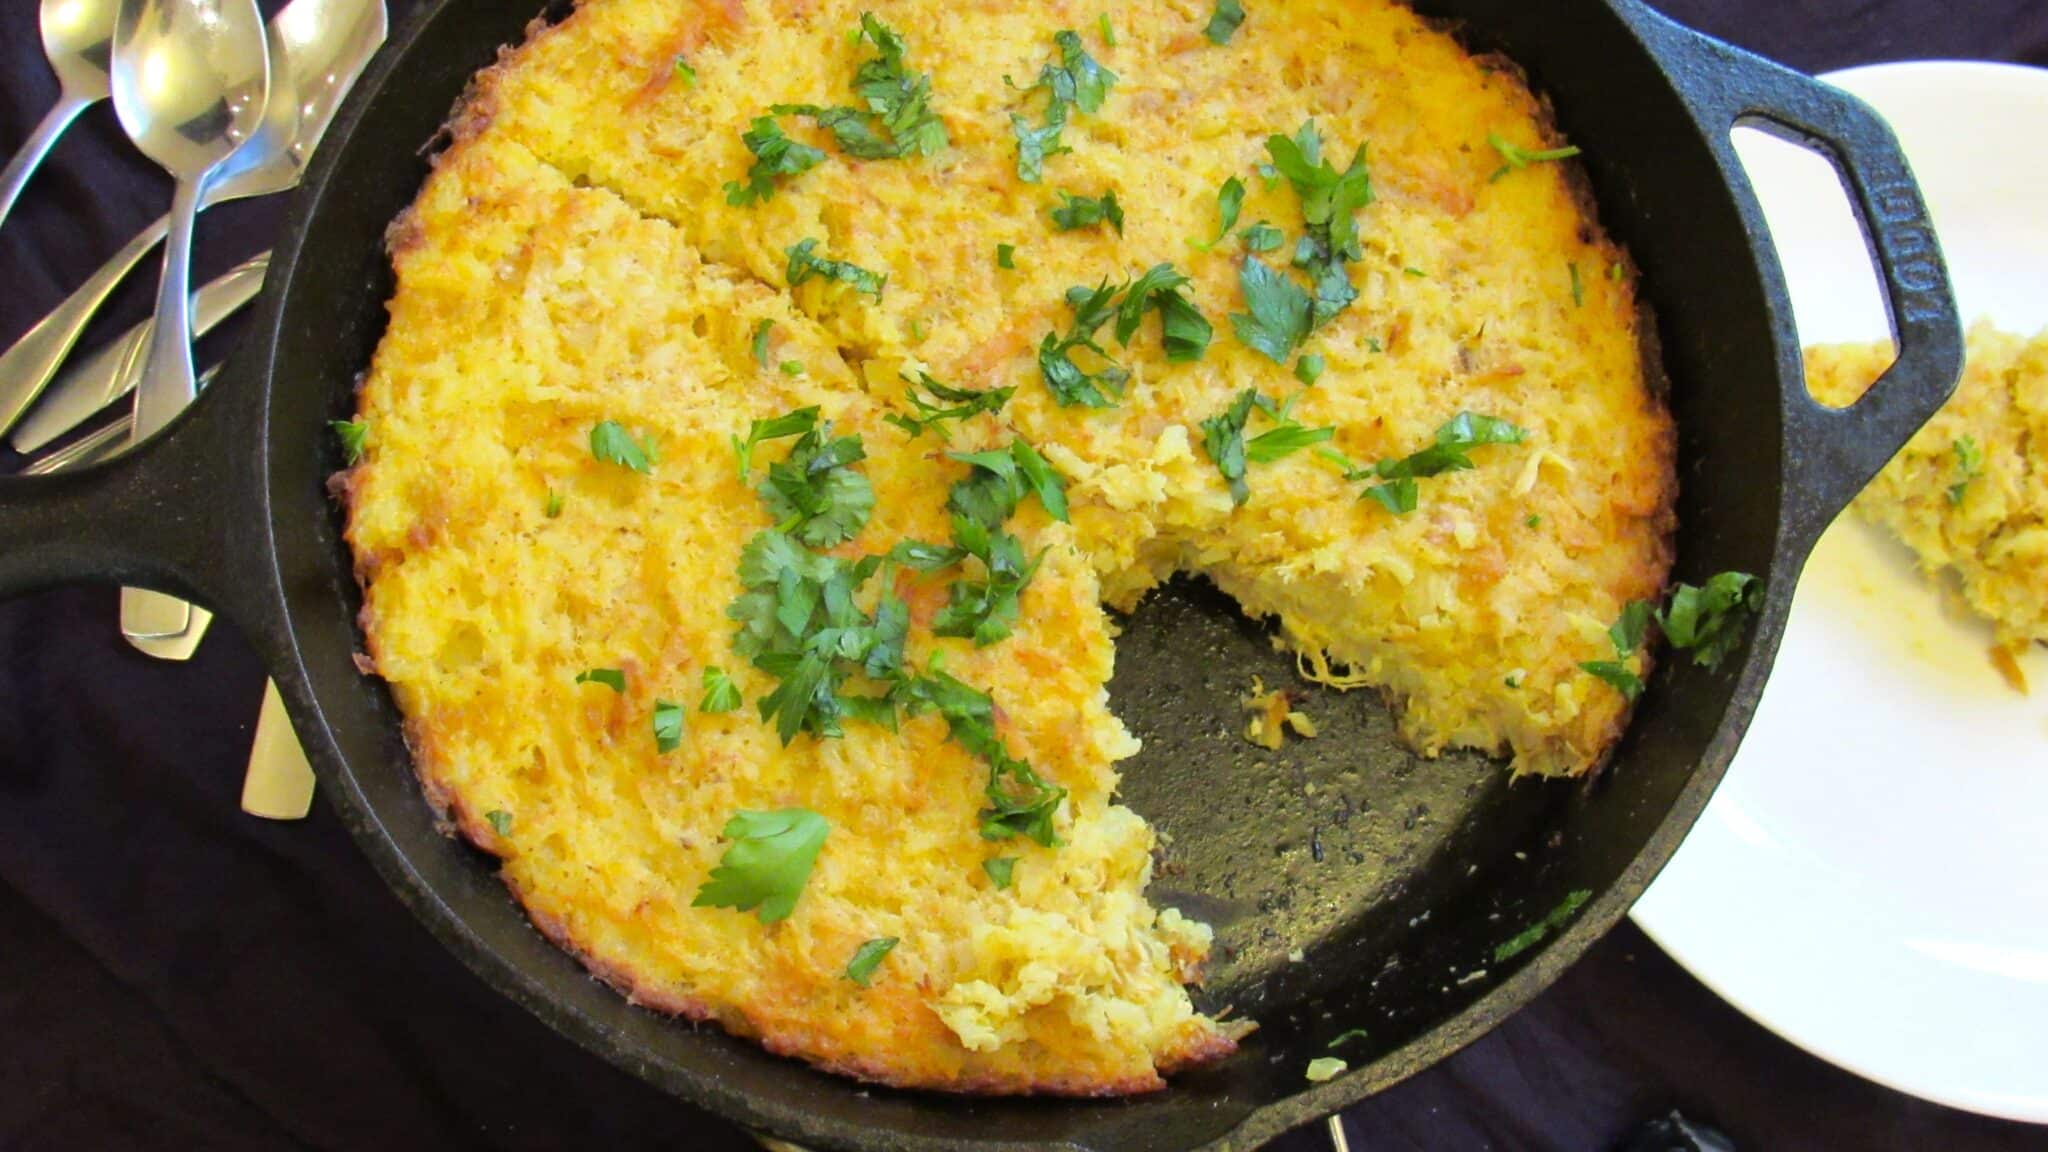 yellow rice and chicken casserole (Tahchin) in cast-iron skillet garnished with parsley and cilantro.